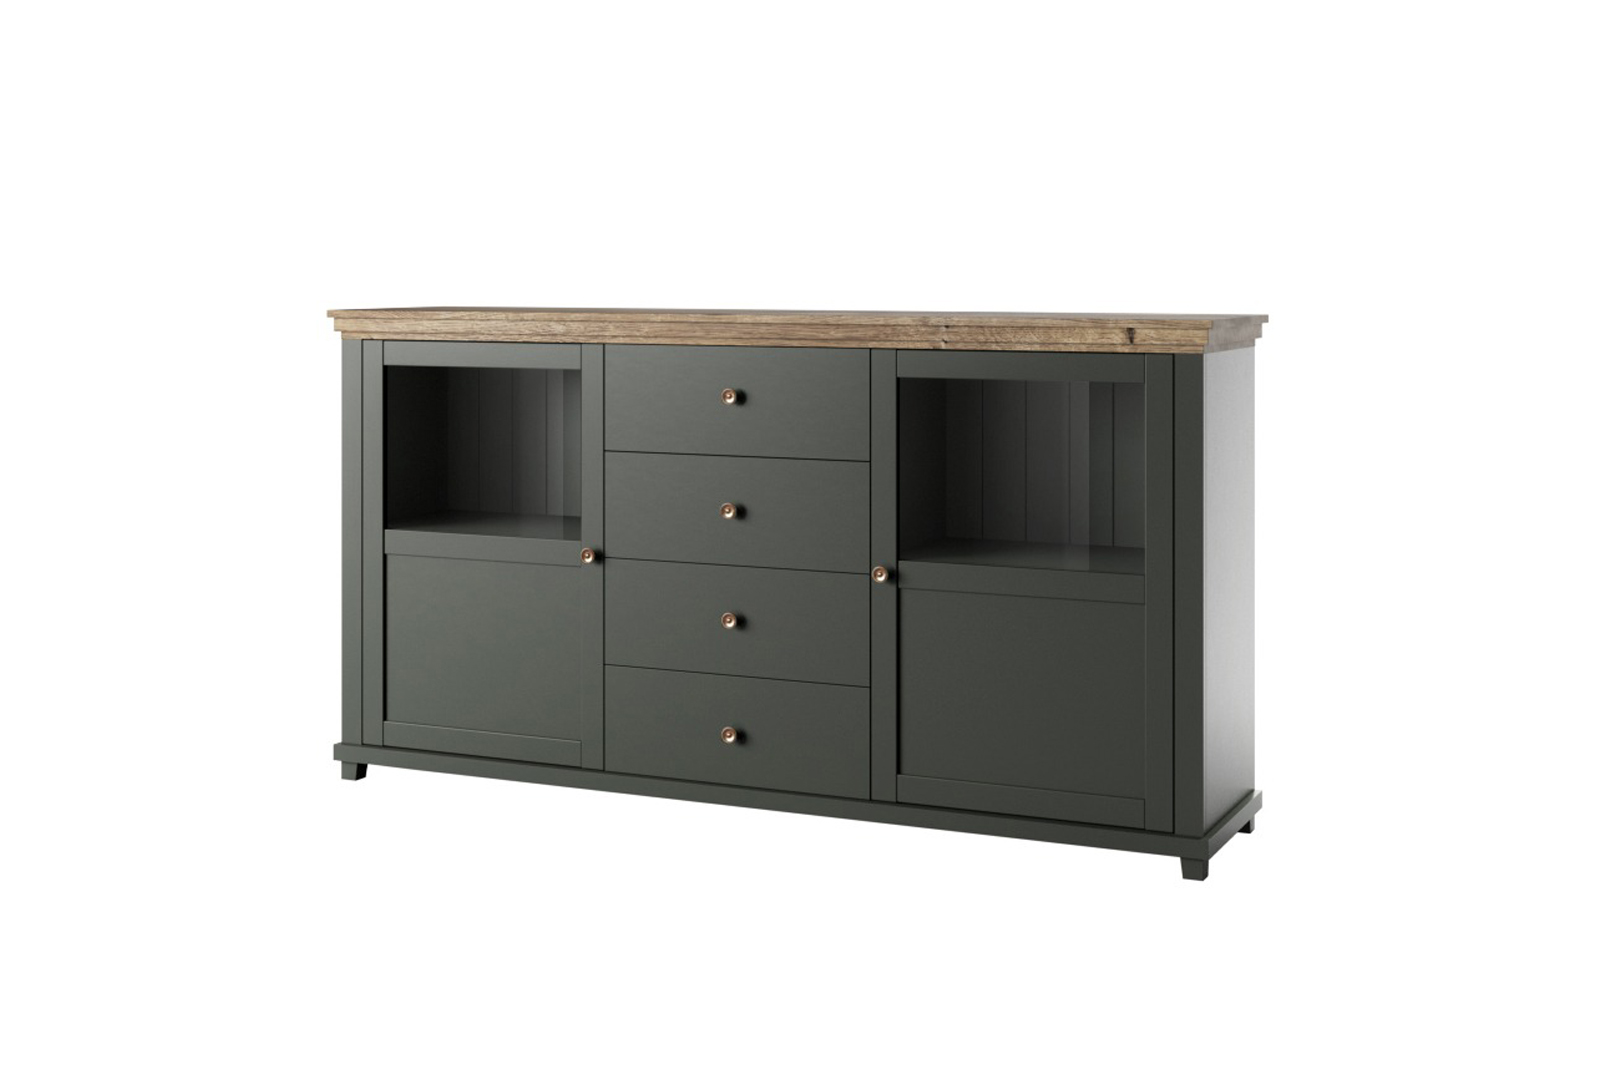 EVORA CHEST OF DRAWERS TYPE 25